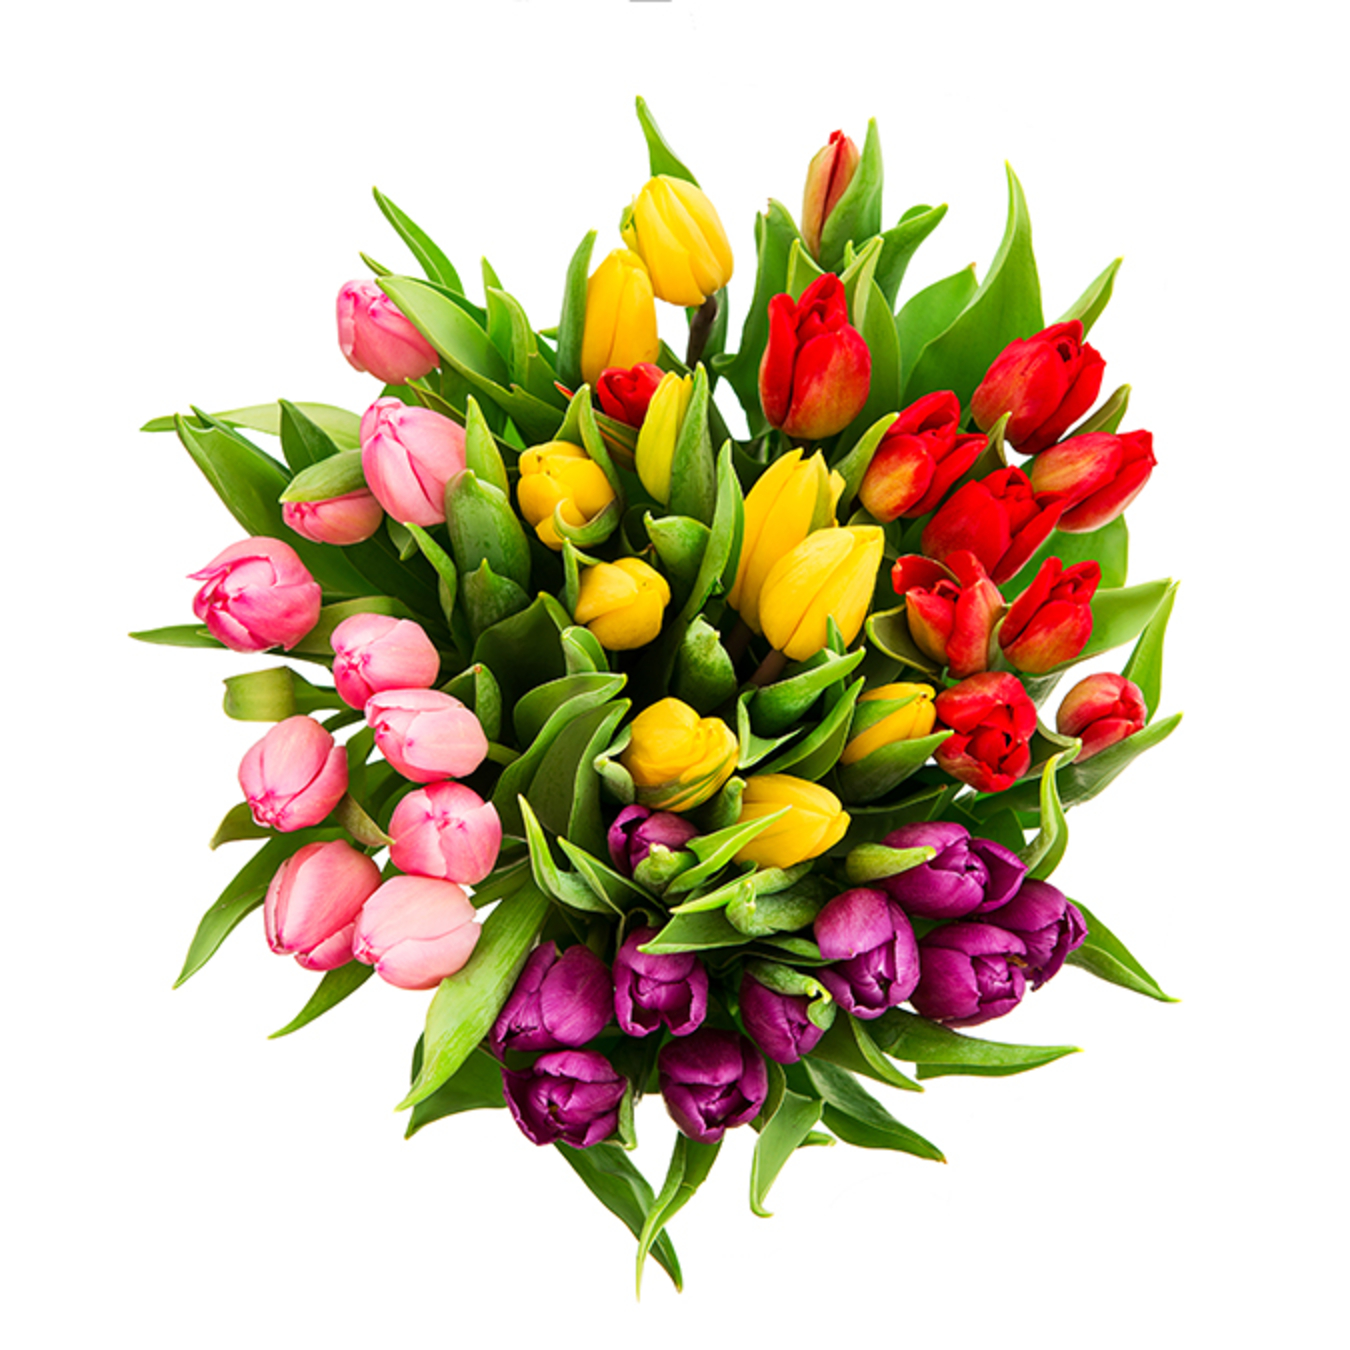 A bouquet of 41 tulips in a variety of colors